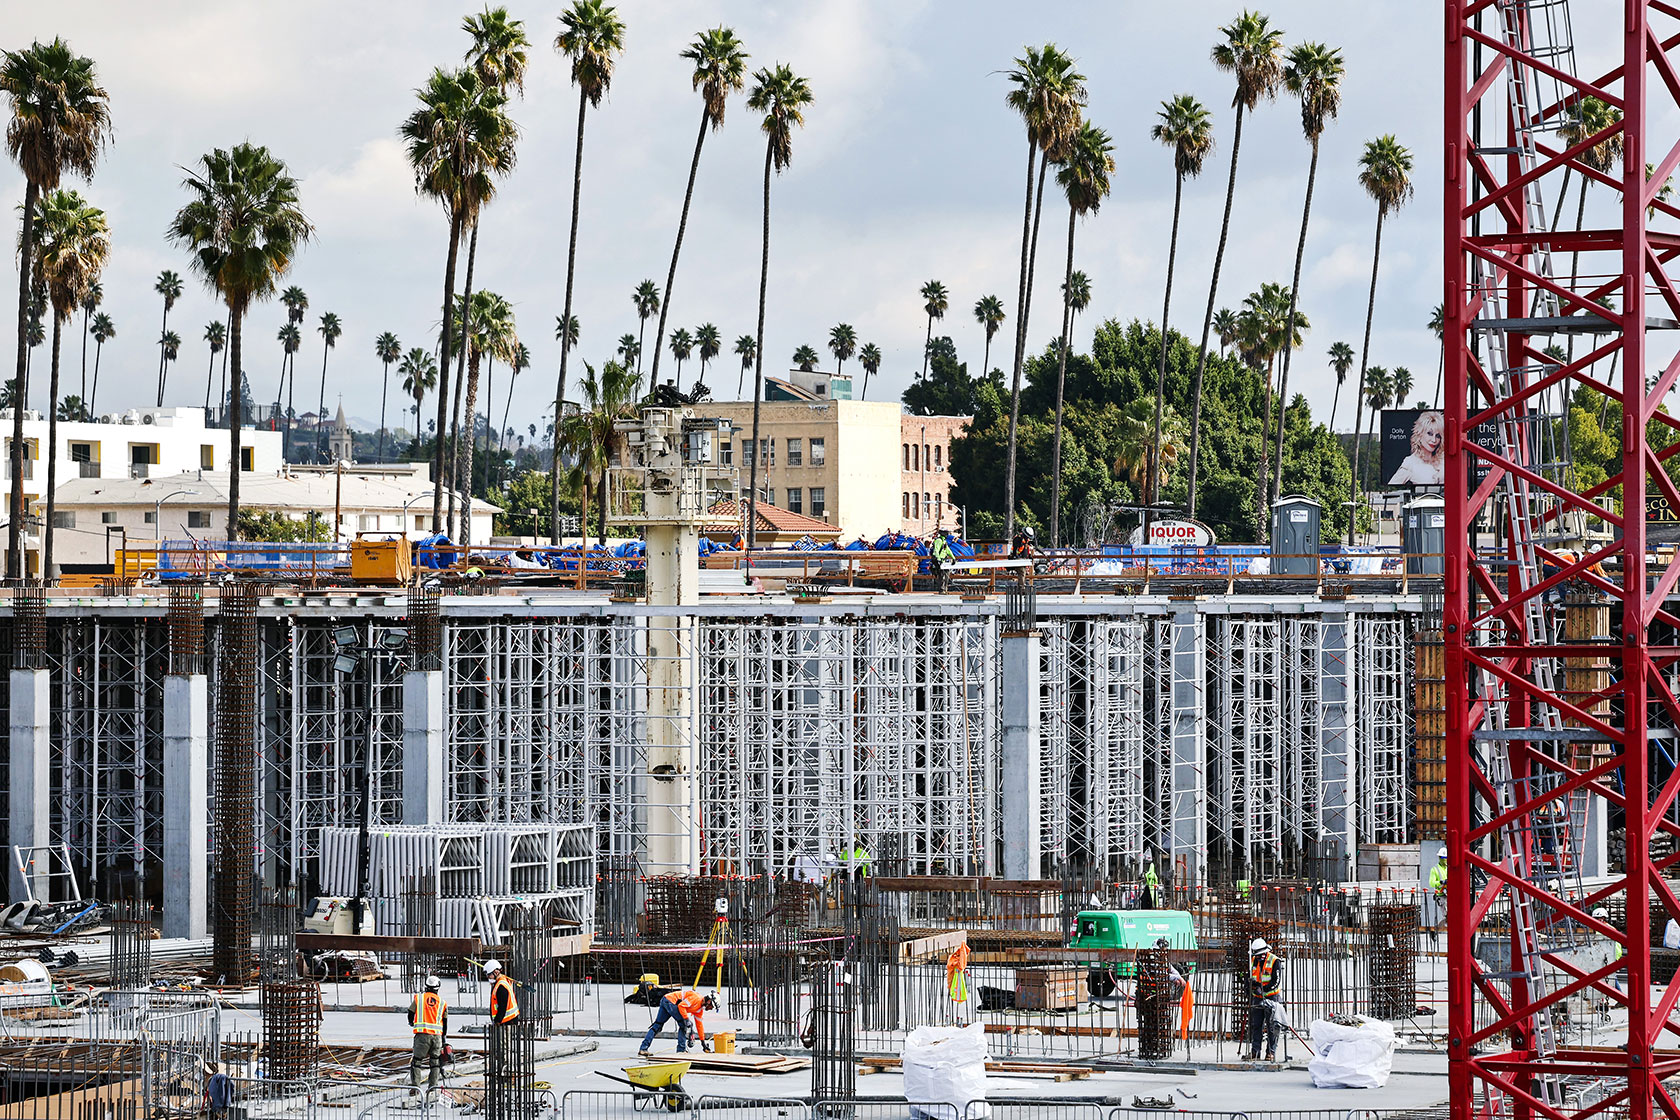 Construction of apartment complex with palm trees in background